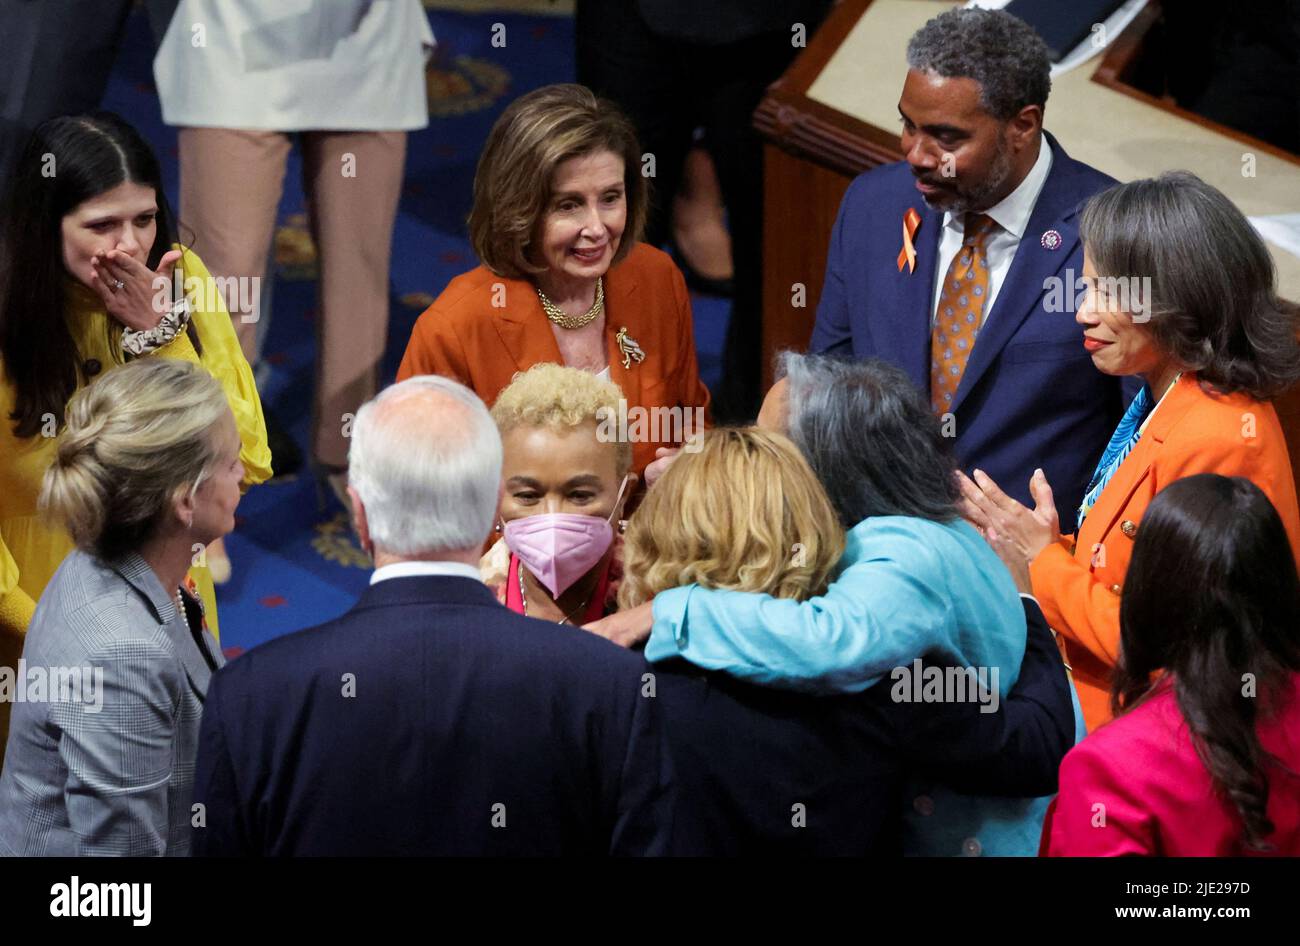 U.S. Speaker of the House Nancy Pelosi (D-CA) celebrates along with U.S. House of Representatives Democrats after passing of the 'Bipartisan Safer Communities Act' gun safety legislation already passed by the U.S. Senate during a final vote in the House Chamber on Capitol Hill in Washington, June 24, 2022.  REUTERS/Jim Bourg Stock Photo